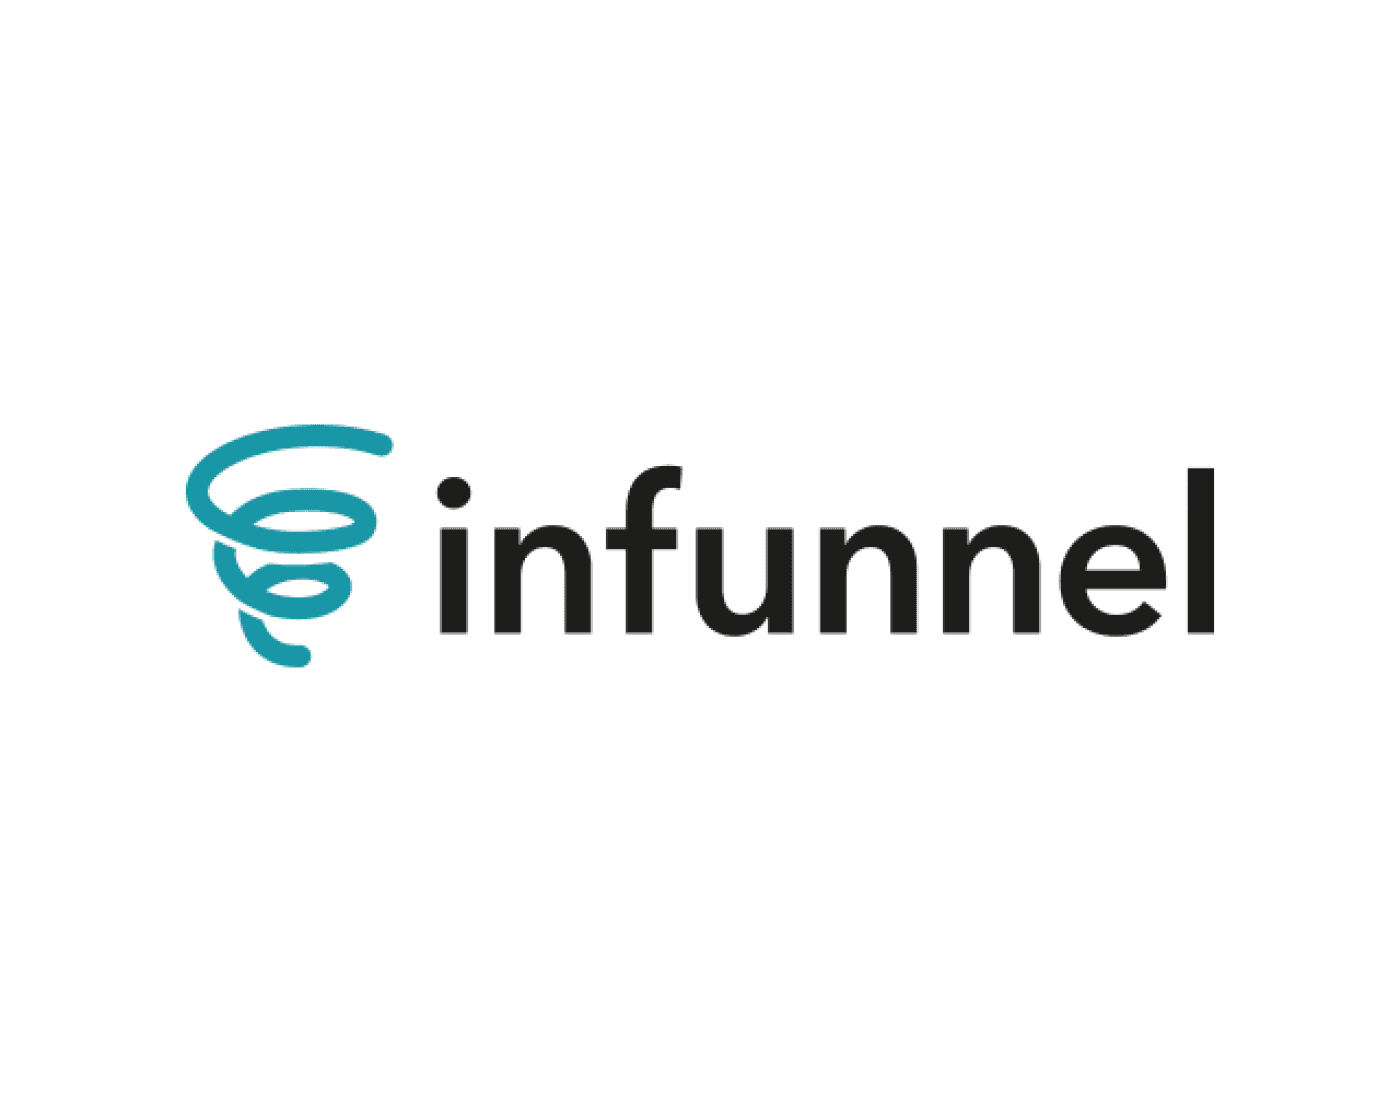 infunnel-640x500-01.png